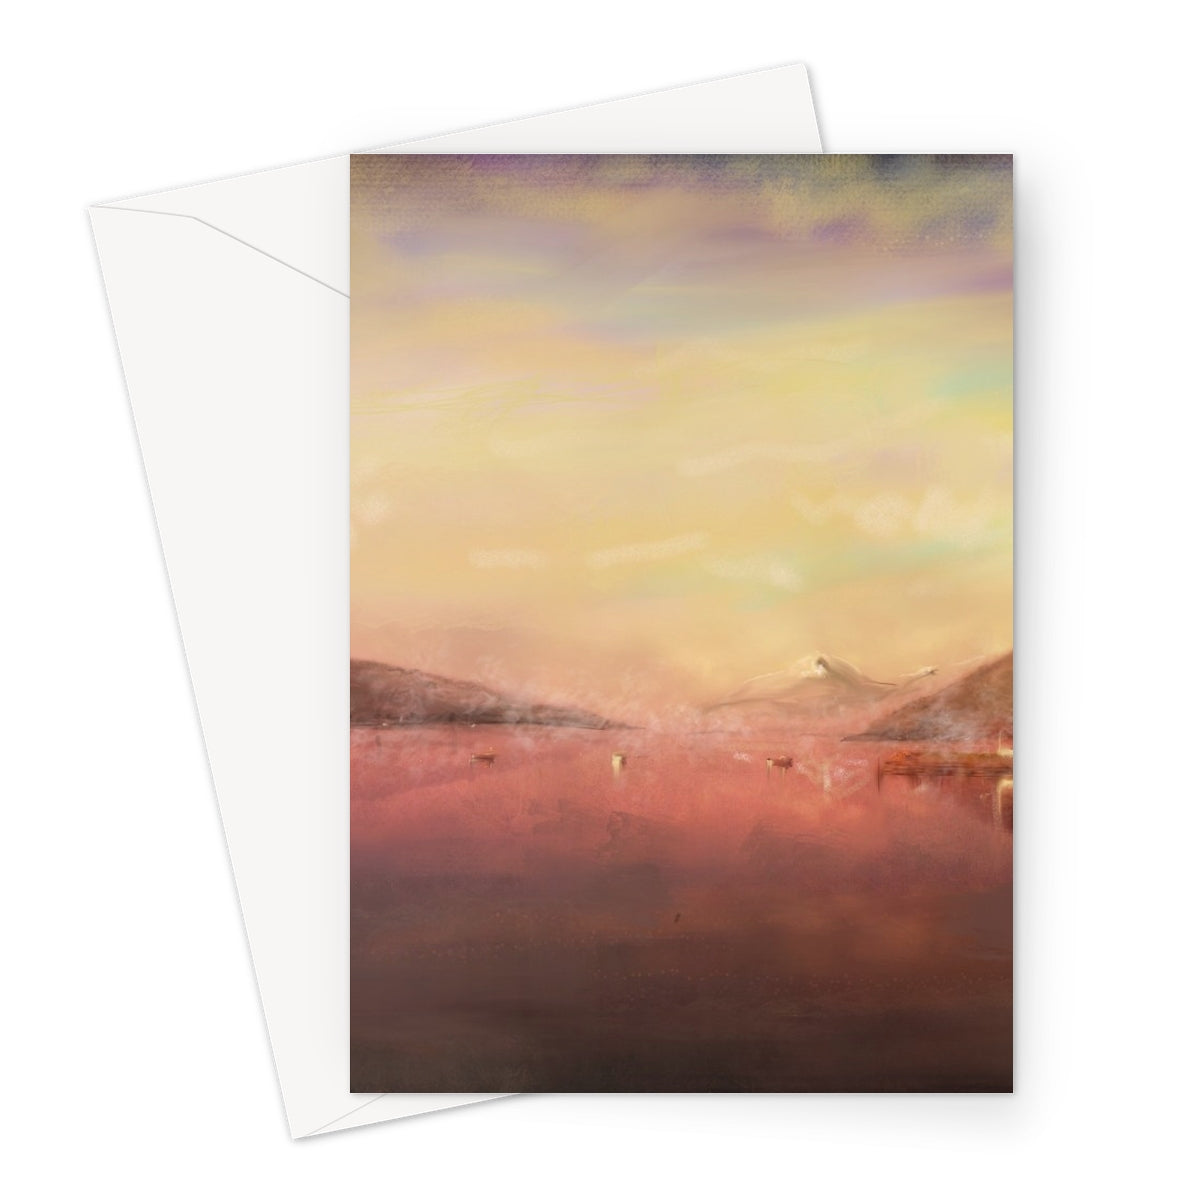 Loch Tay Art Gifts Greeting Card-Greetings Cards-Scottish Lochs & Mountains Art Gallery-A5 Portrait-1 Card-Paintings, Prints, Homeware, Art Gifts From Scotland By Scottish Artist Kevin Hunter